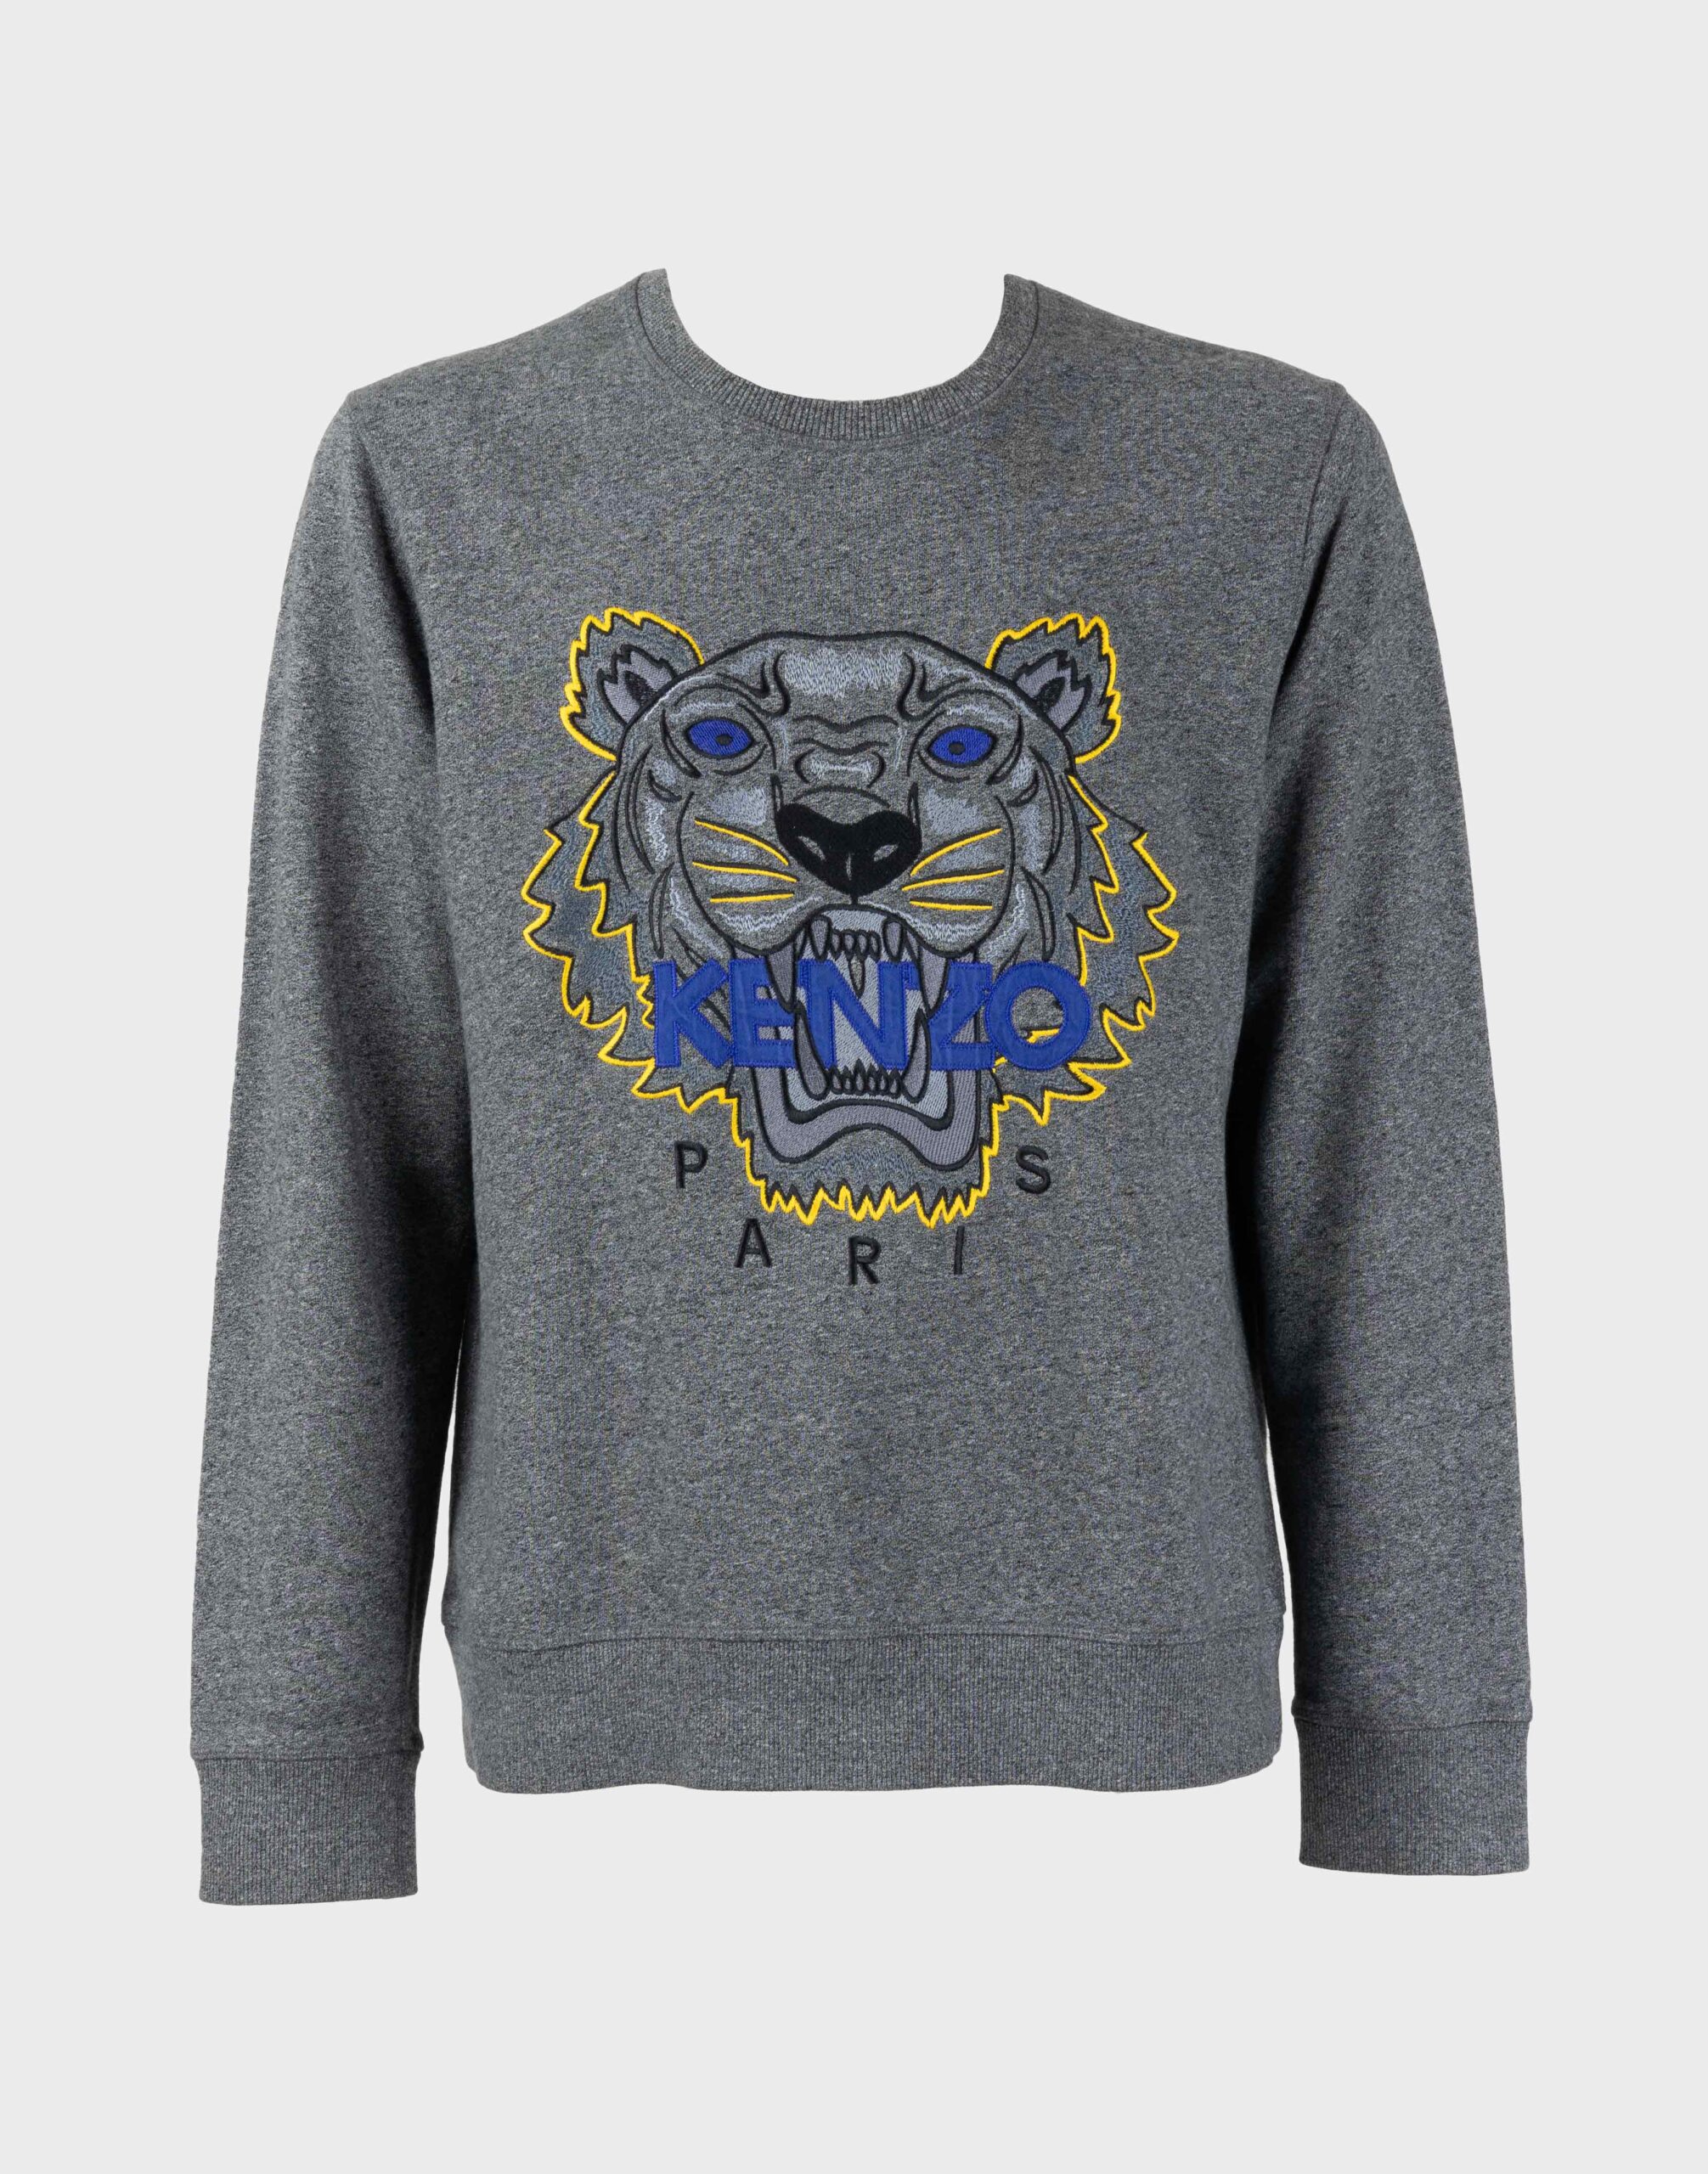 Men's grey sweatshirt with multicolored embroidered tiger and blue logo.